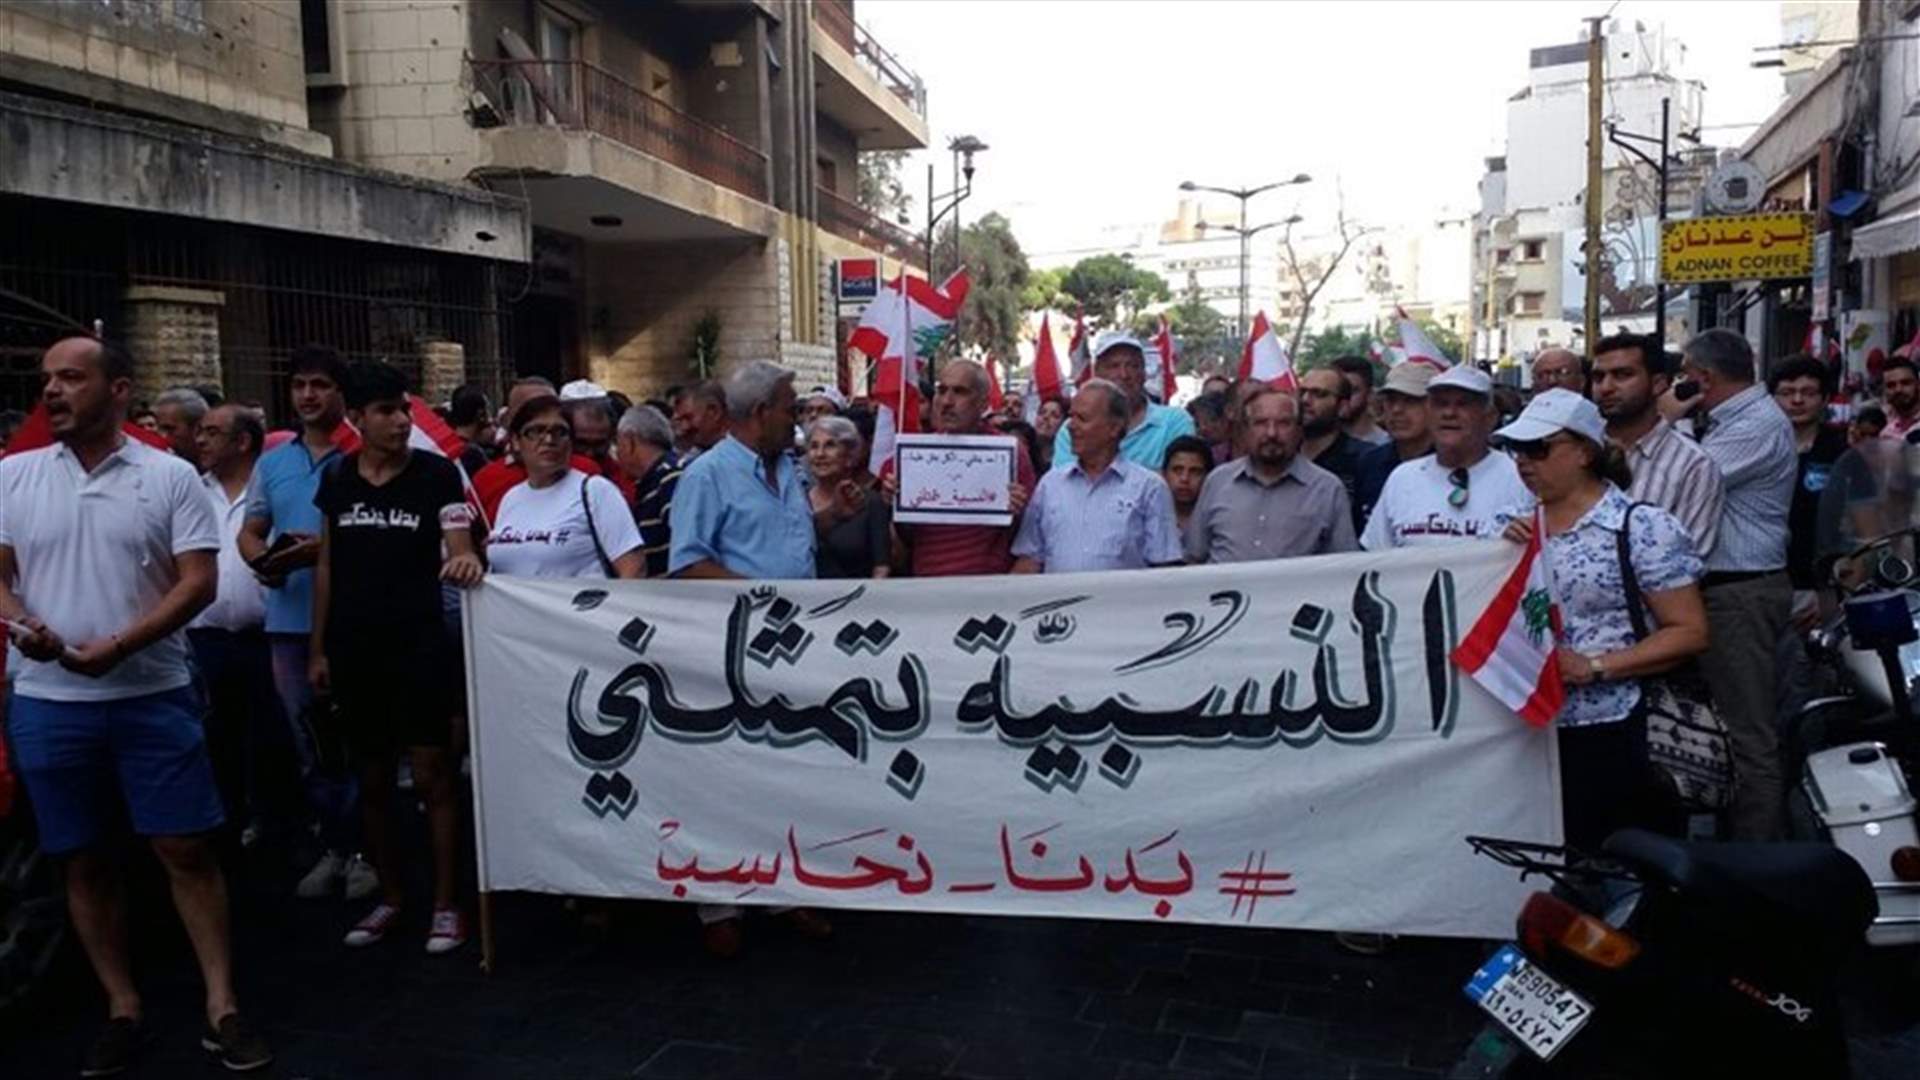 Rally held in Riad al-Solh over proportional representation law